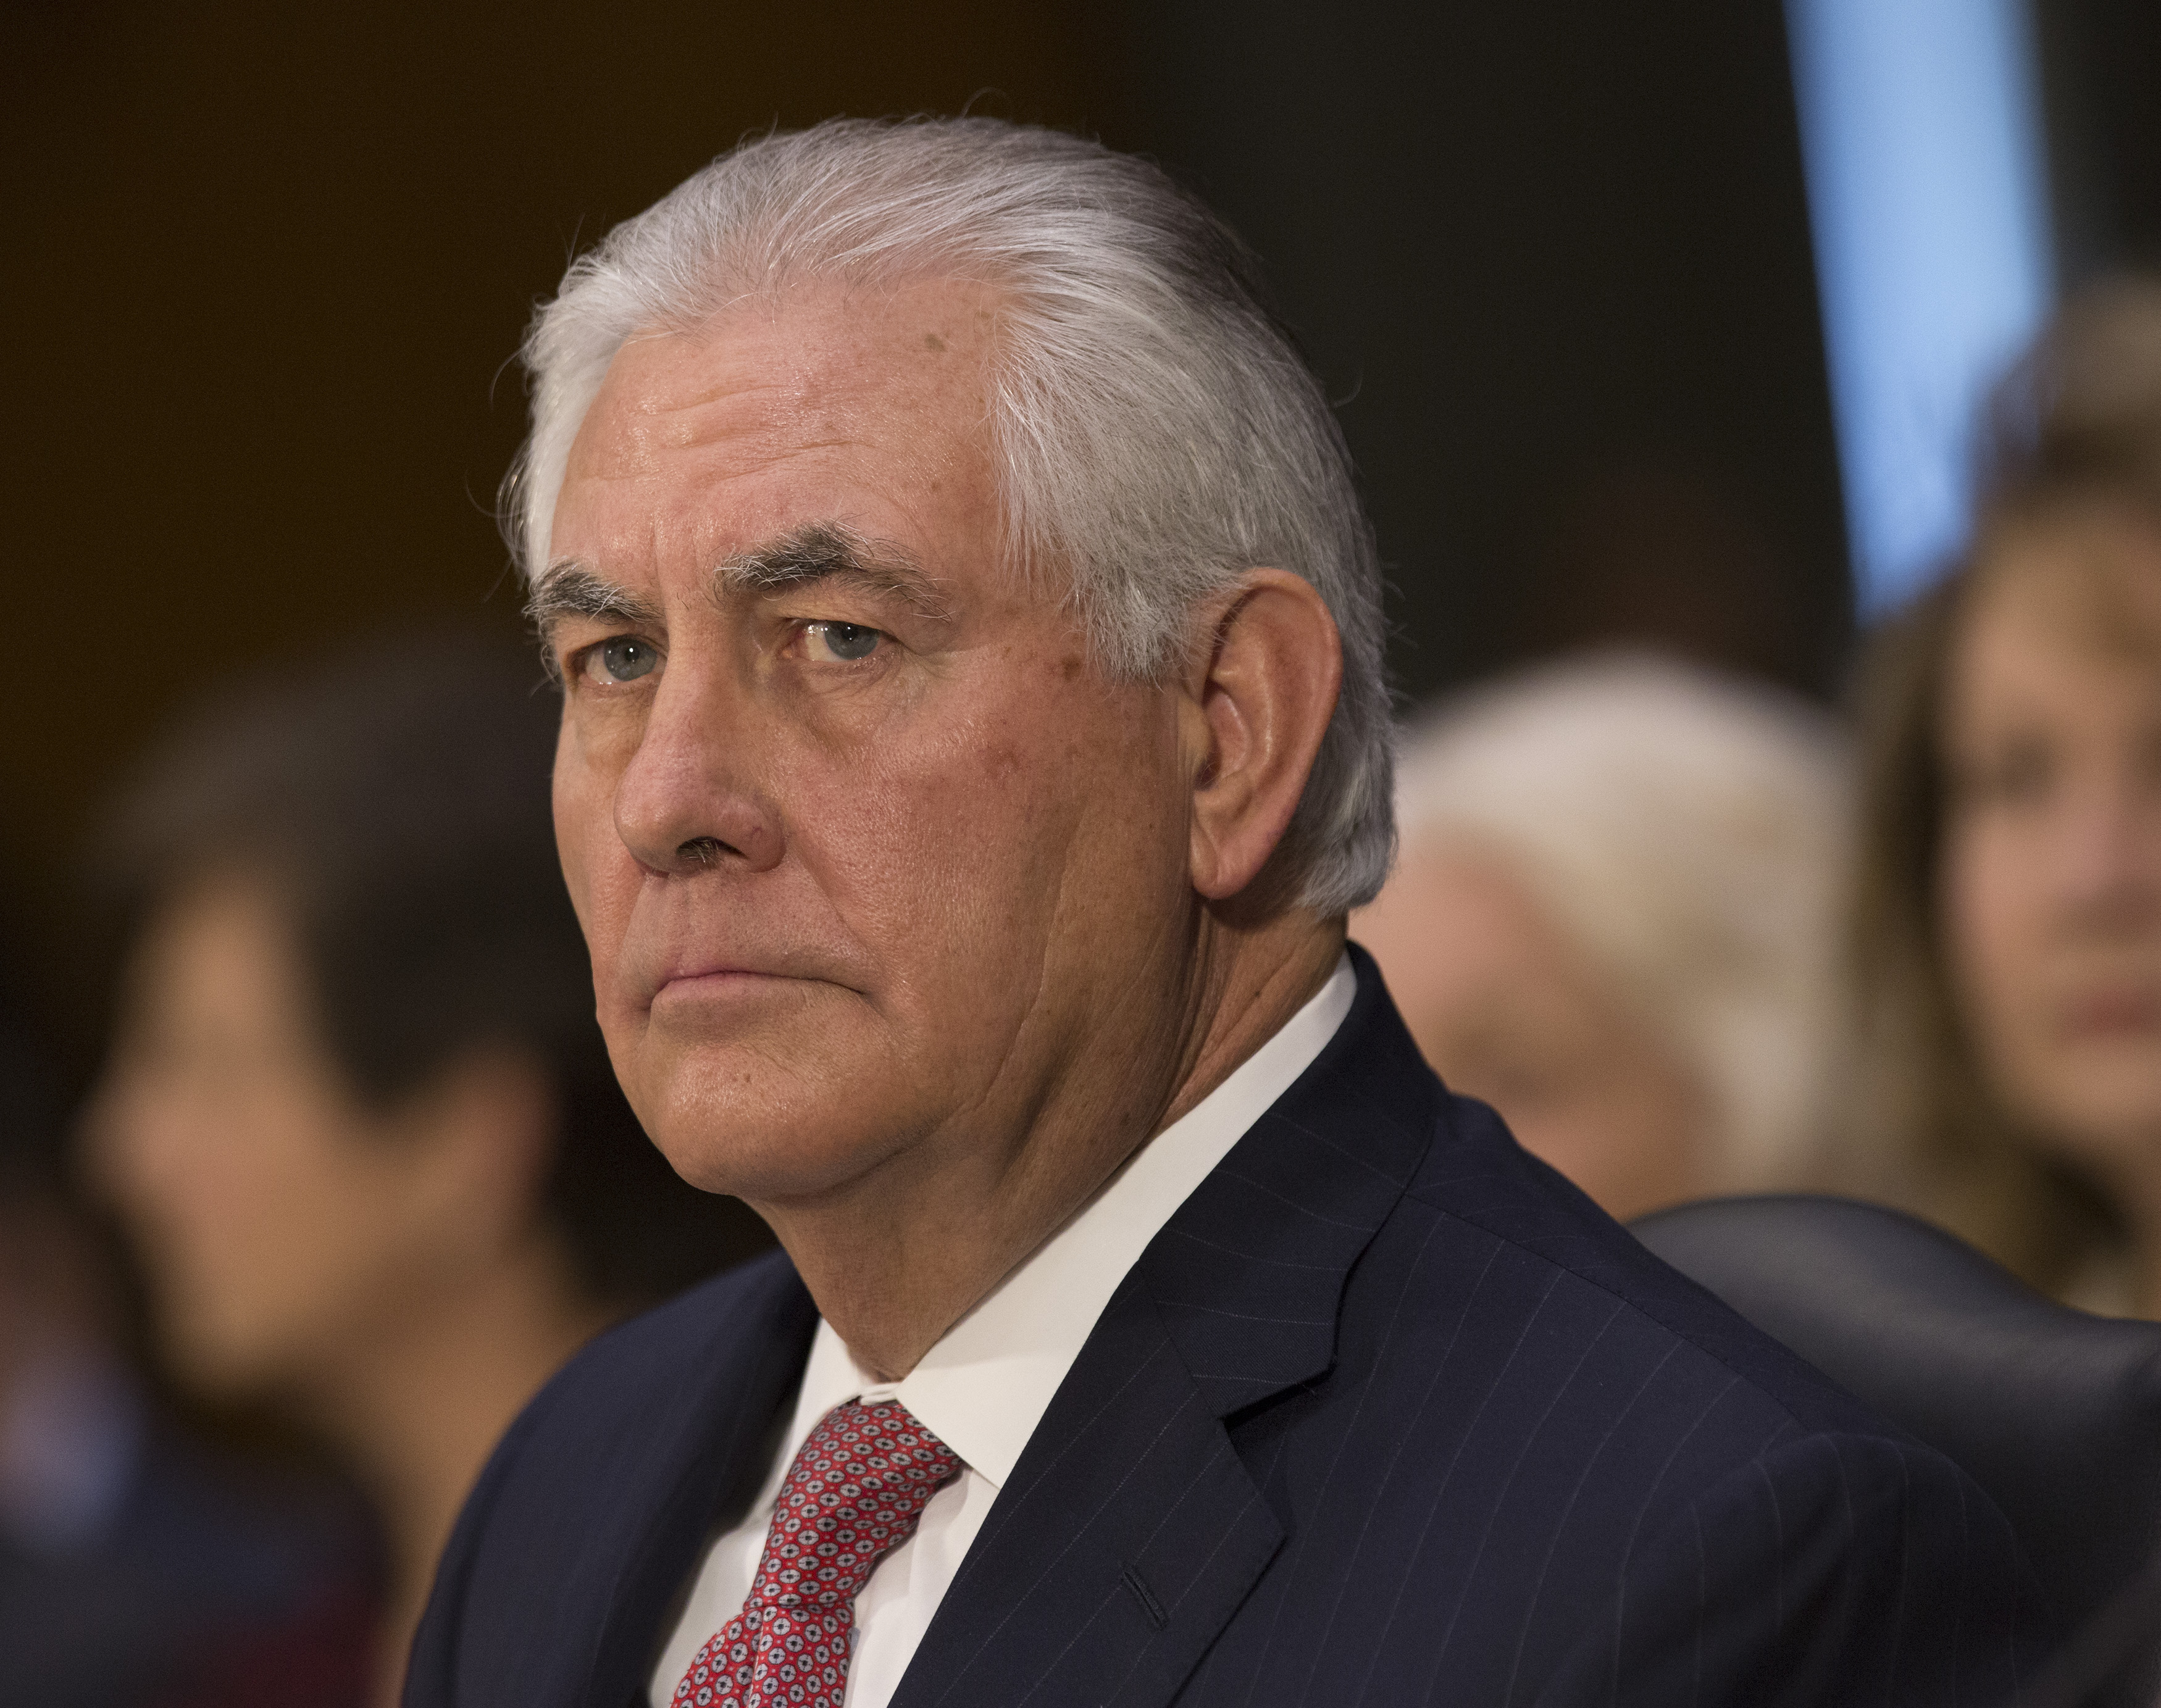 Former ExxonMobil CEO Rex Tillerson appears before the Senate Foreign Relations Committee for his confirmation hearing to be U.S. Secretary of State on Capitol Hill in Washington, D.C., on Jan. 11, 2017 (Chris Kleponis—AFP/Getty Images)